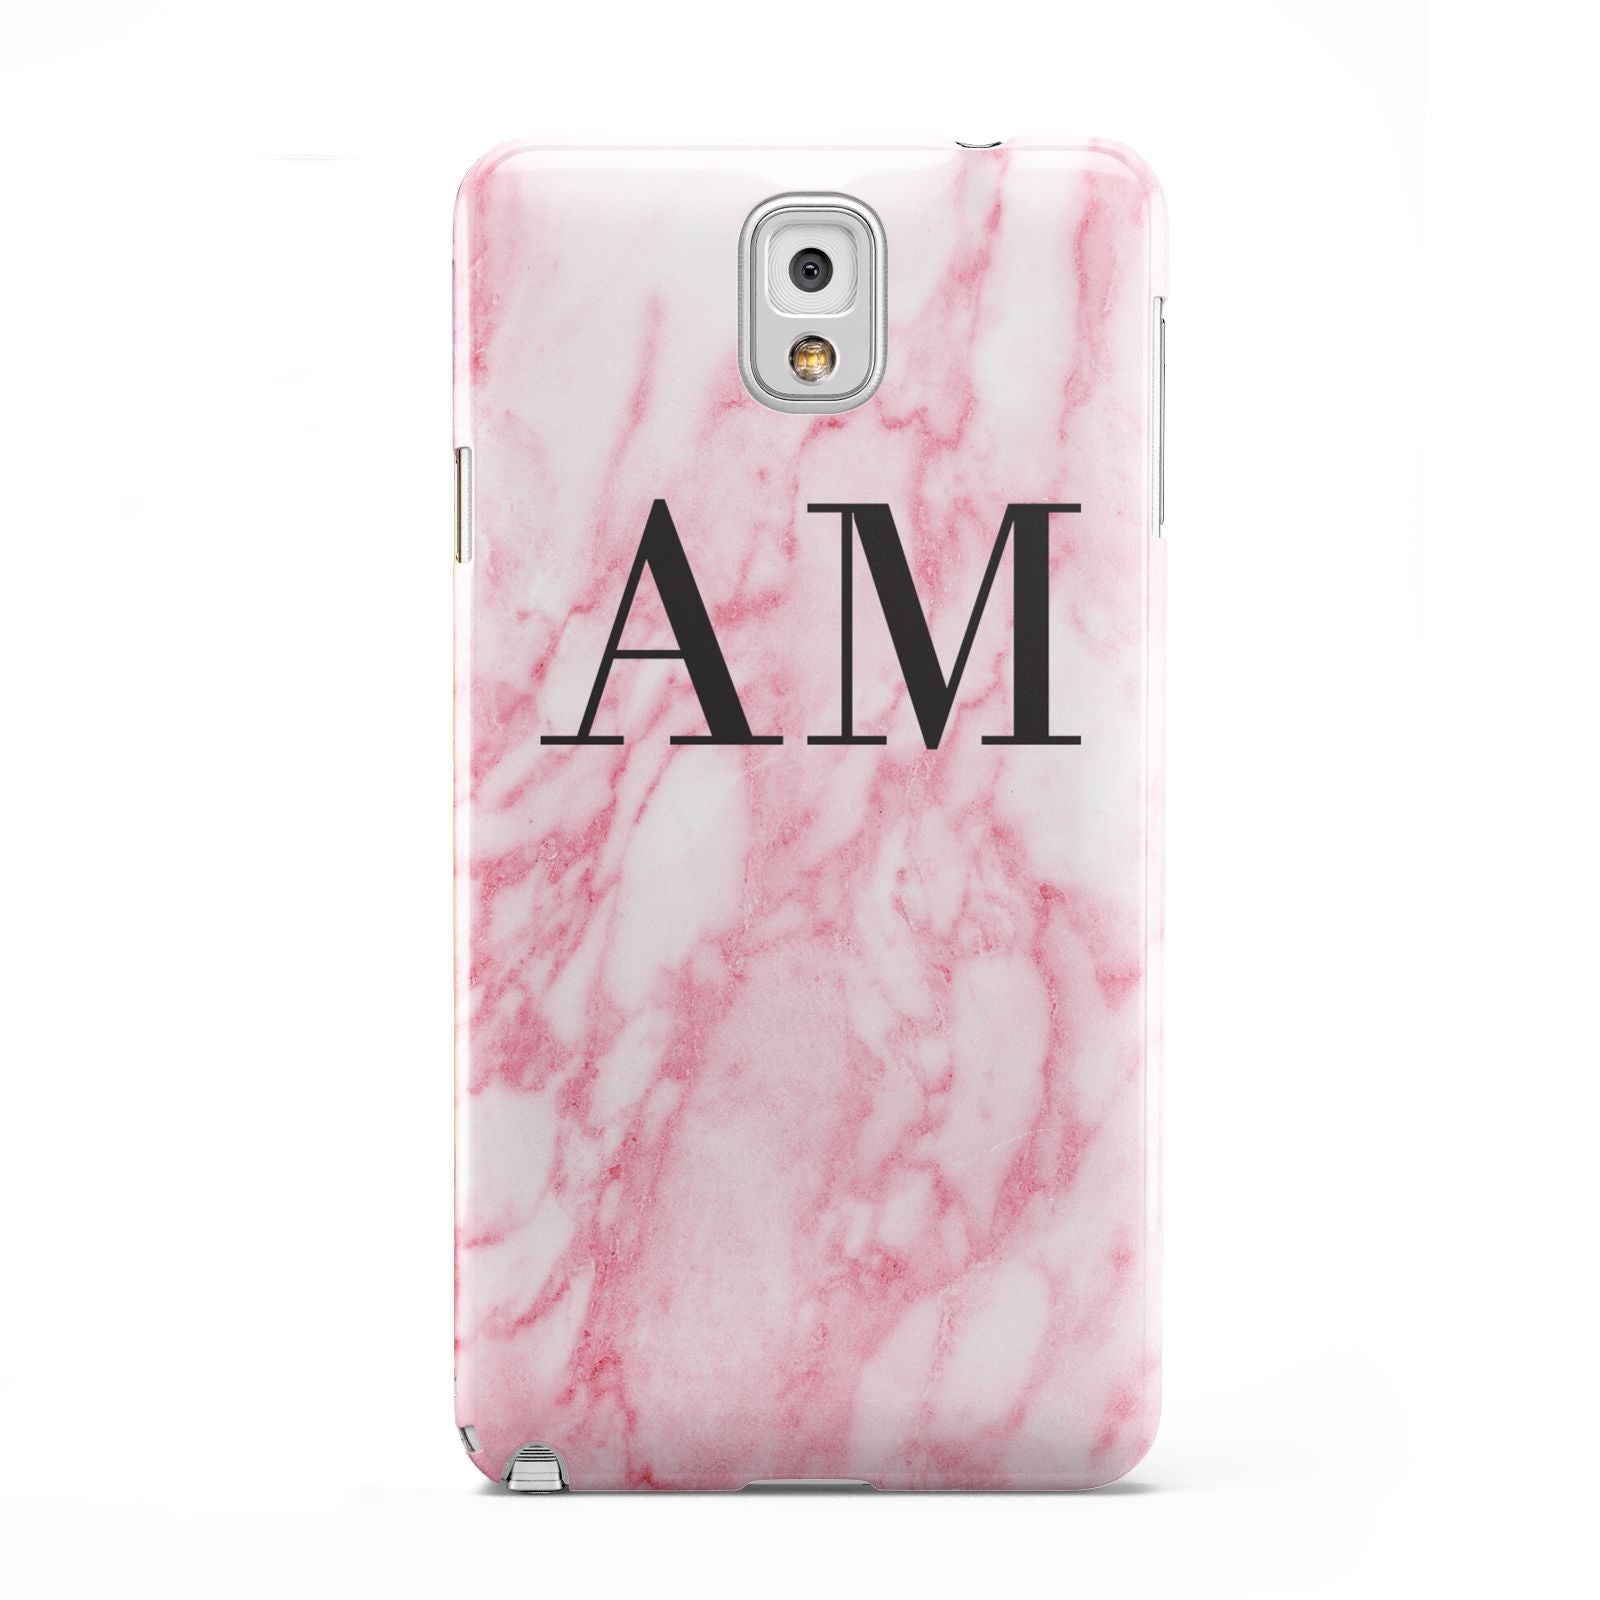 Personalised Pink Marble Monogrammed Samsung Galaxy Note 3 Case